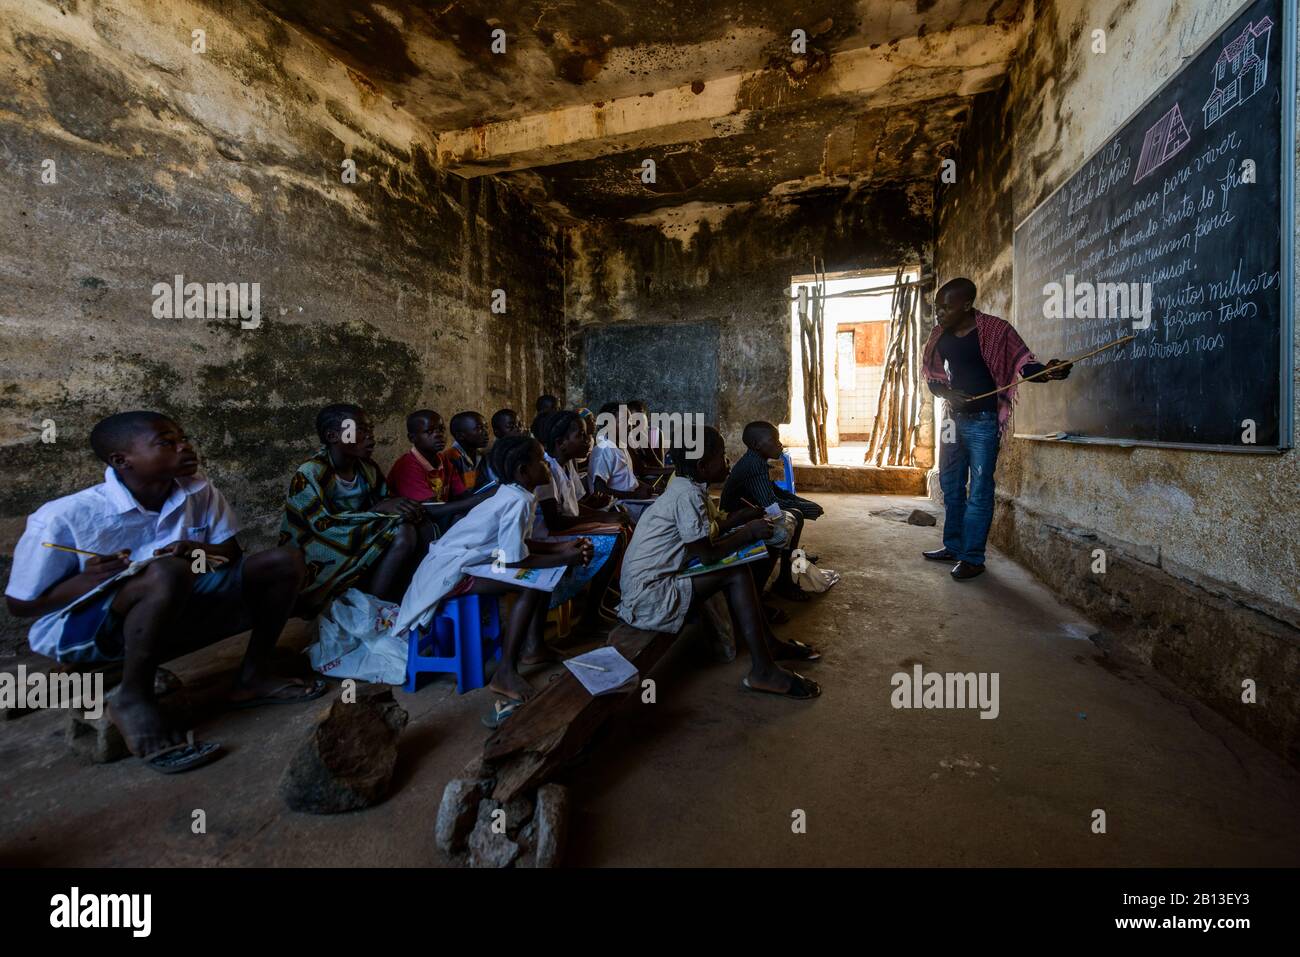 A rural school in a destroyed building in southern Angola,Africa Stock Photo